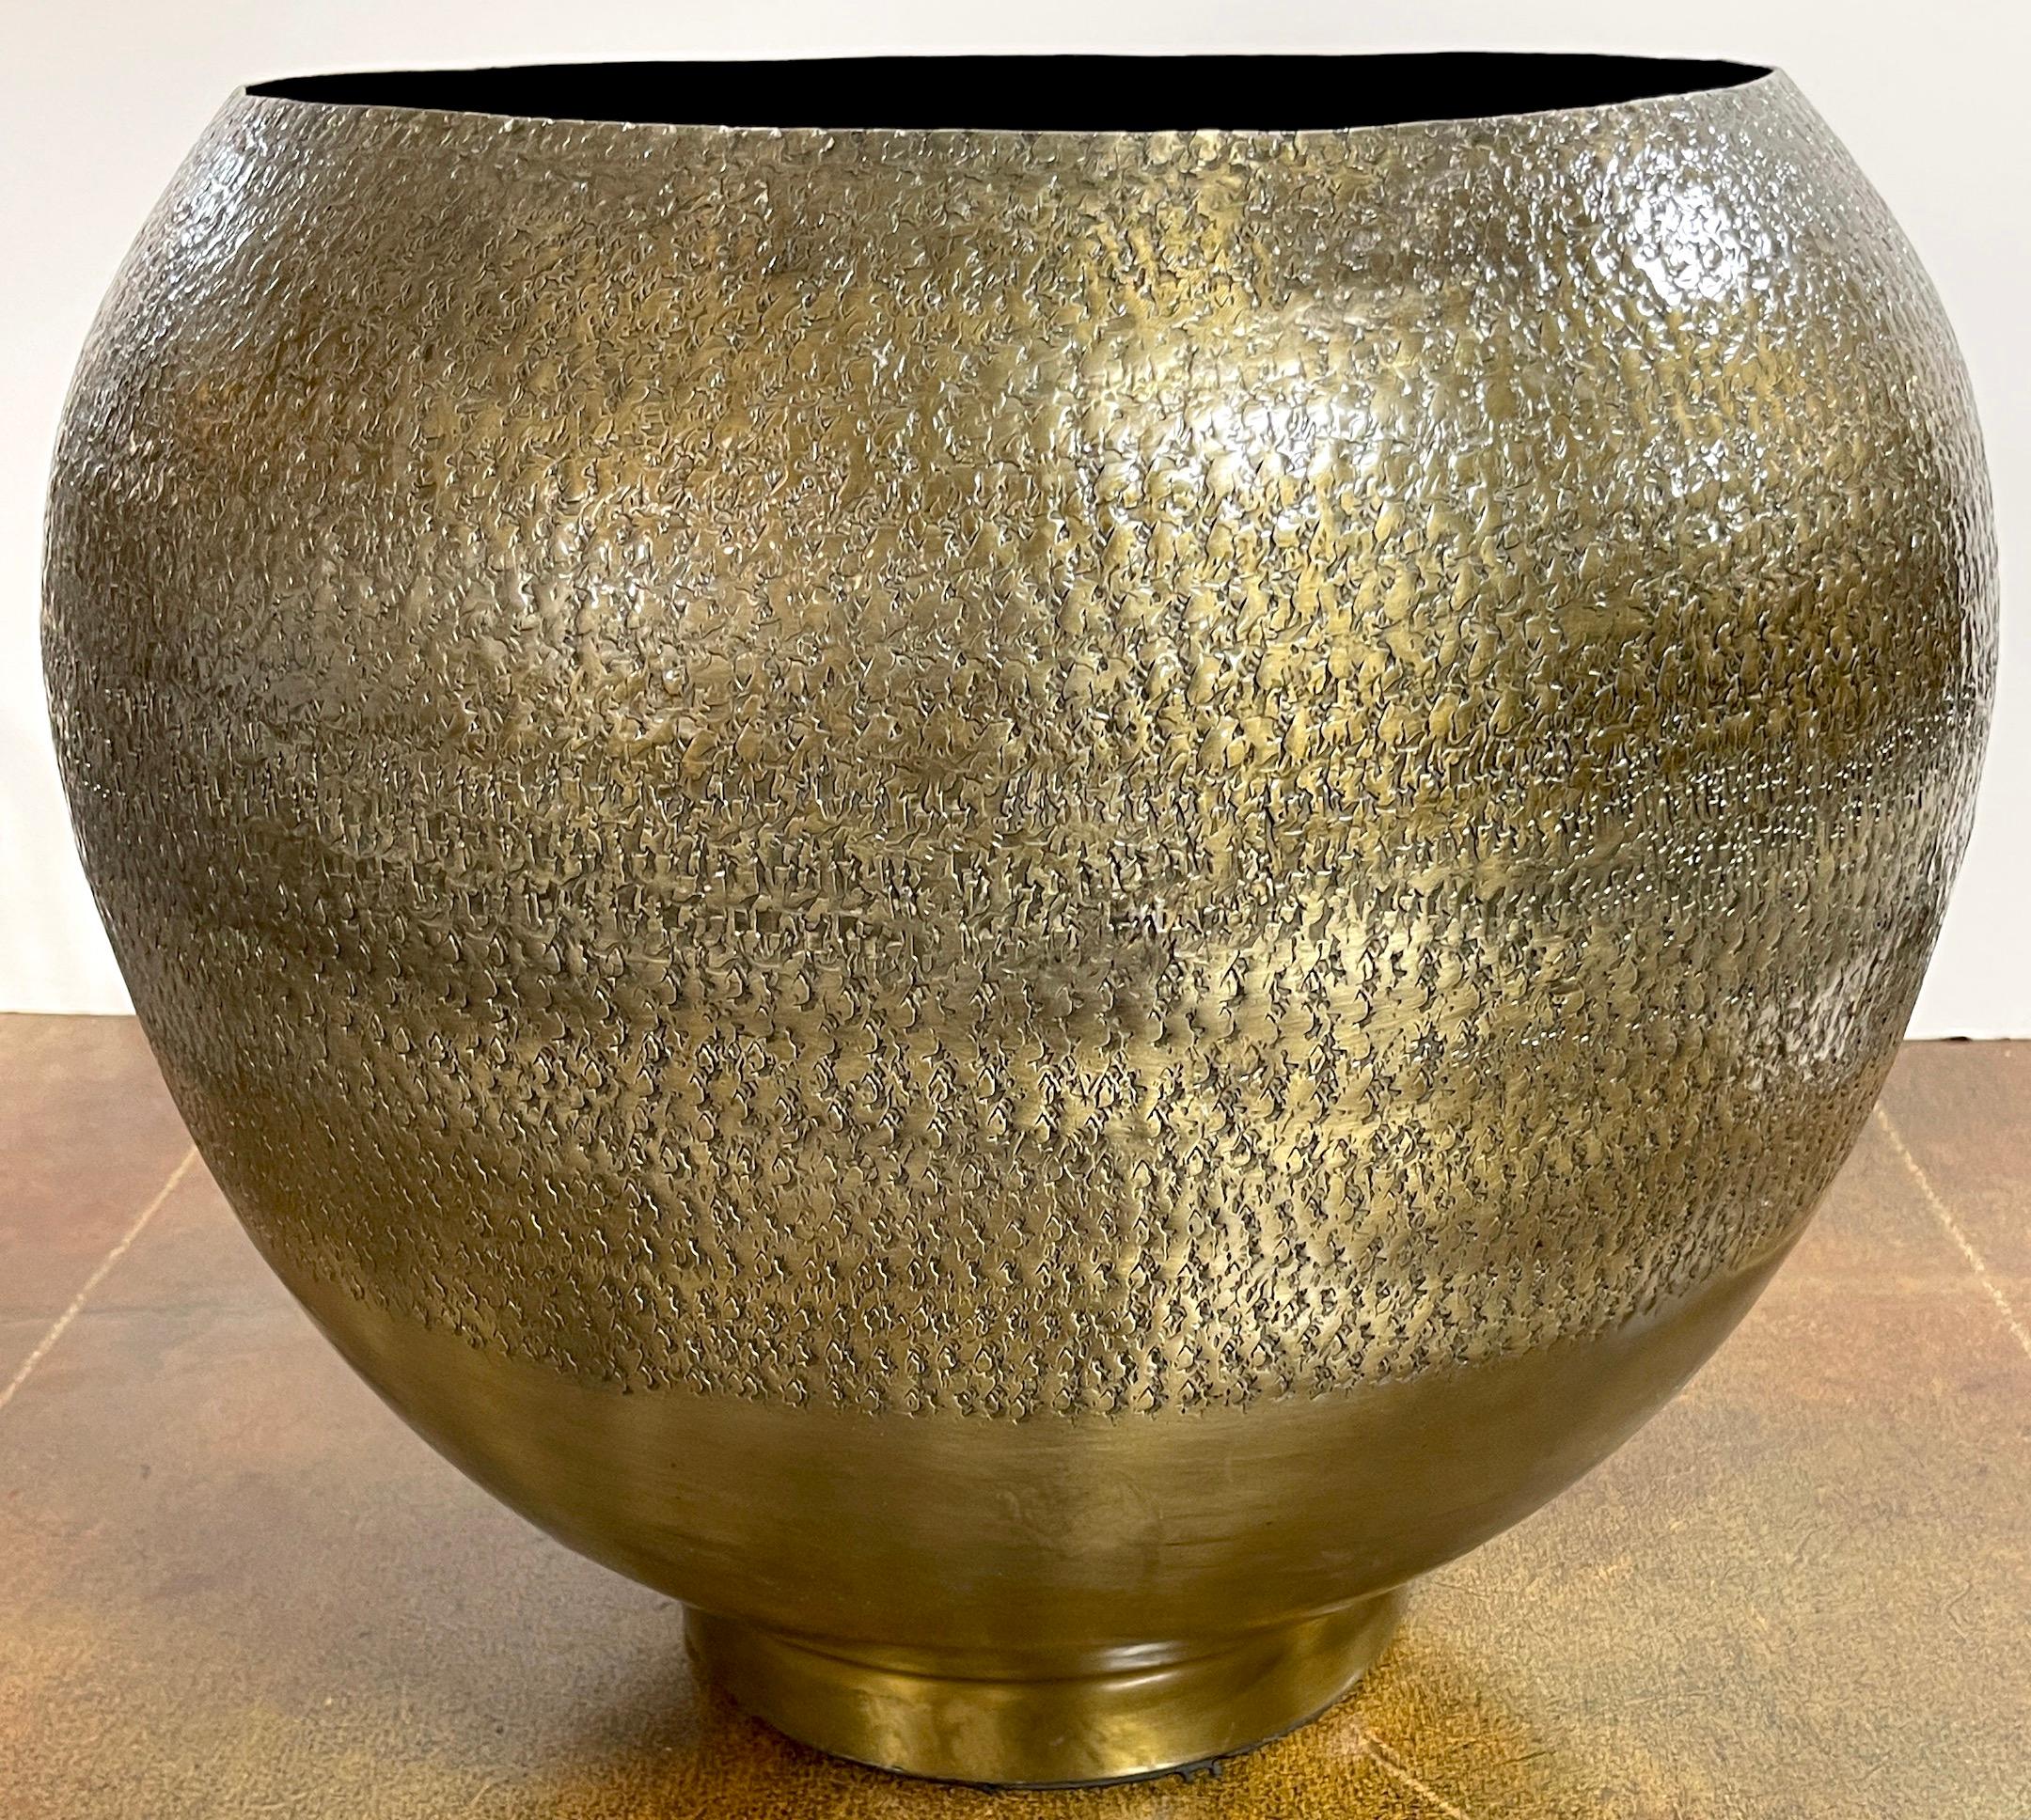 Modern acid washed chased sculptural bronze jardiniere /planter 
Italy, Late 20th century 

A fine example of Italian modern design, of good size, circular in form with a 15-Inch diameter and 18-inch deep blackened interior. The well made, in two